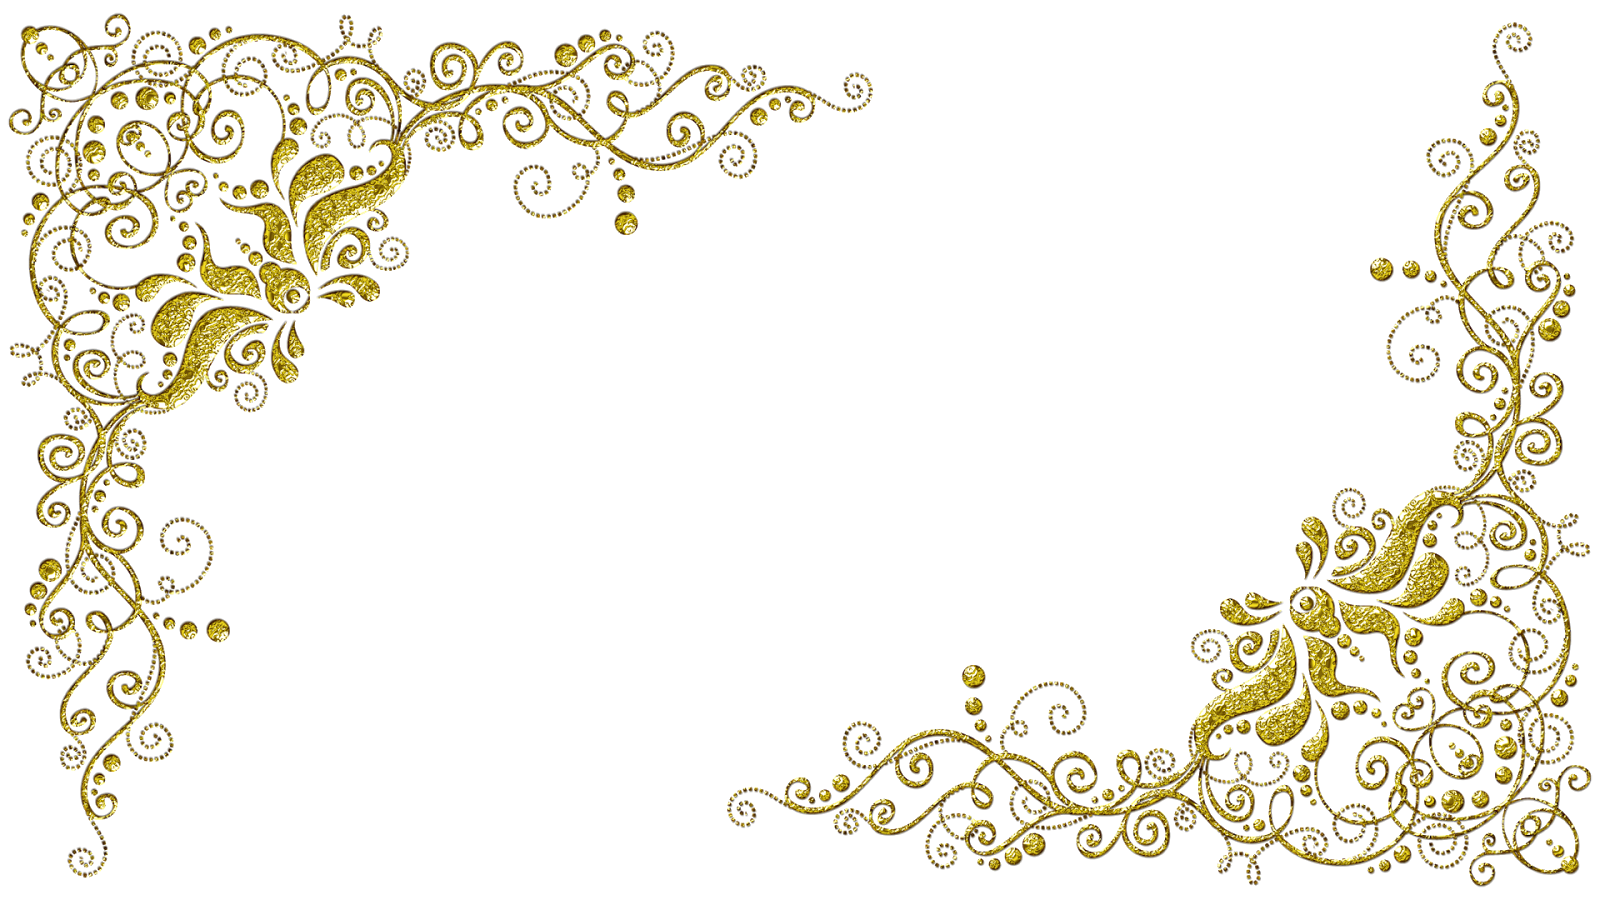 filigree clipart border marriage indian